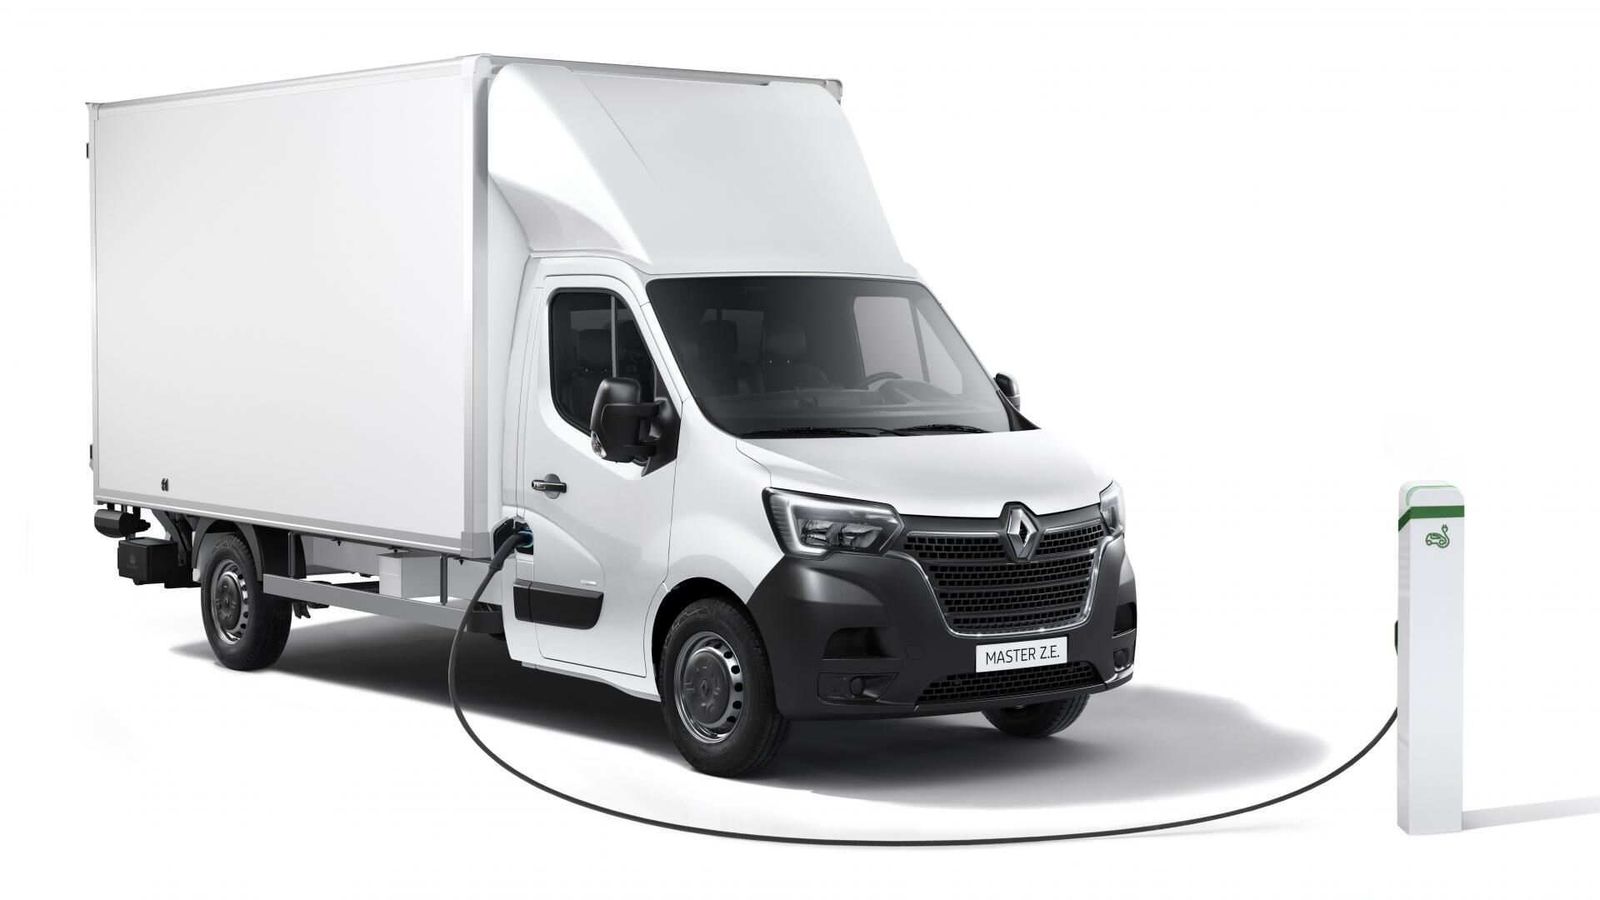 Renault launches new variants of Master ZE fully electric transport vans